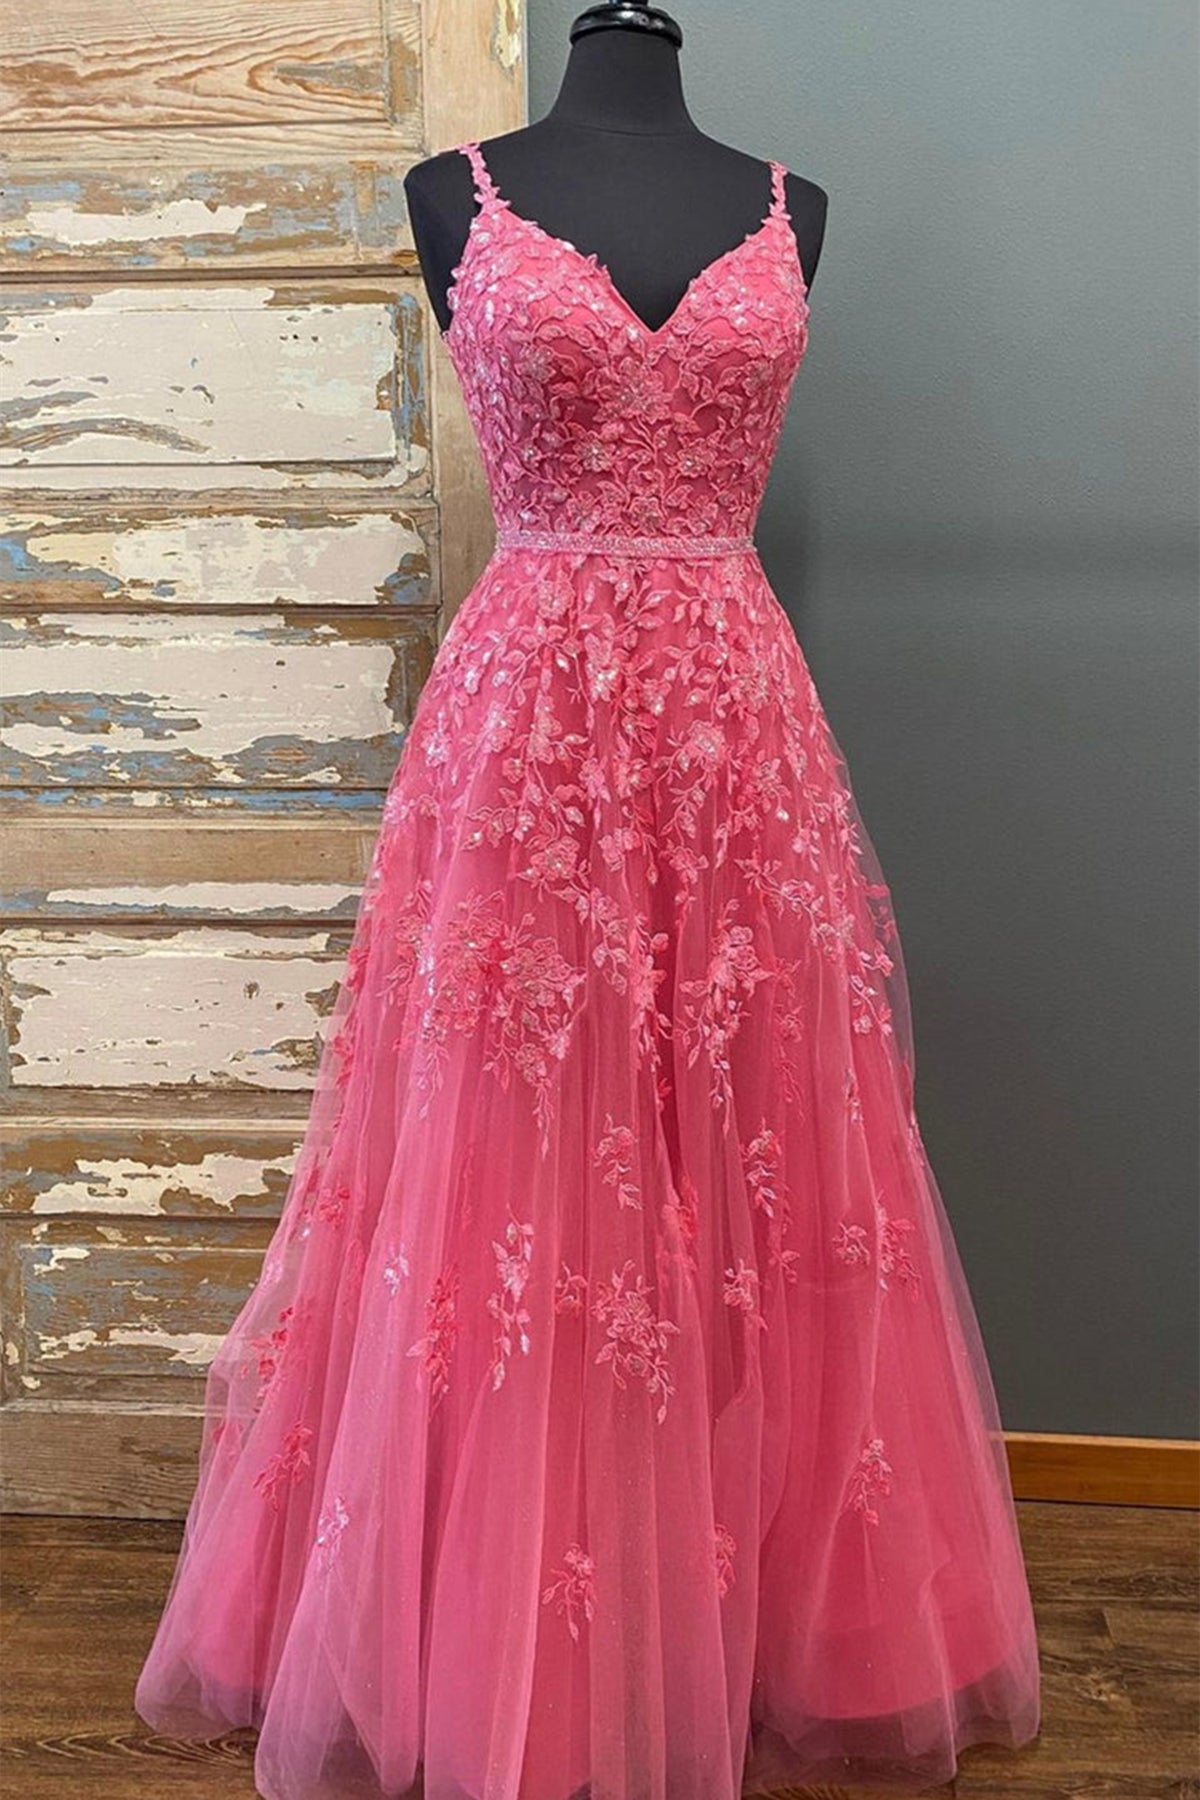 Baby Pink Prom Dress Long Beaded Dress Short Puffy Sleeve Ball Gown Lace  Floral Dress Square Neck Graduation Gown Flower Evening Prom Dress - Etsy